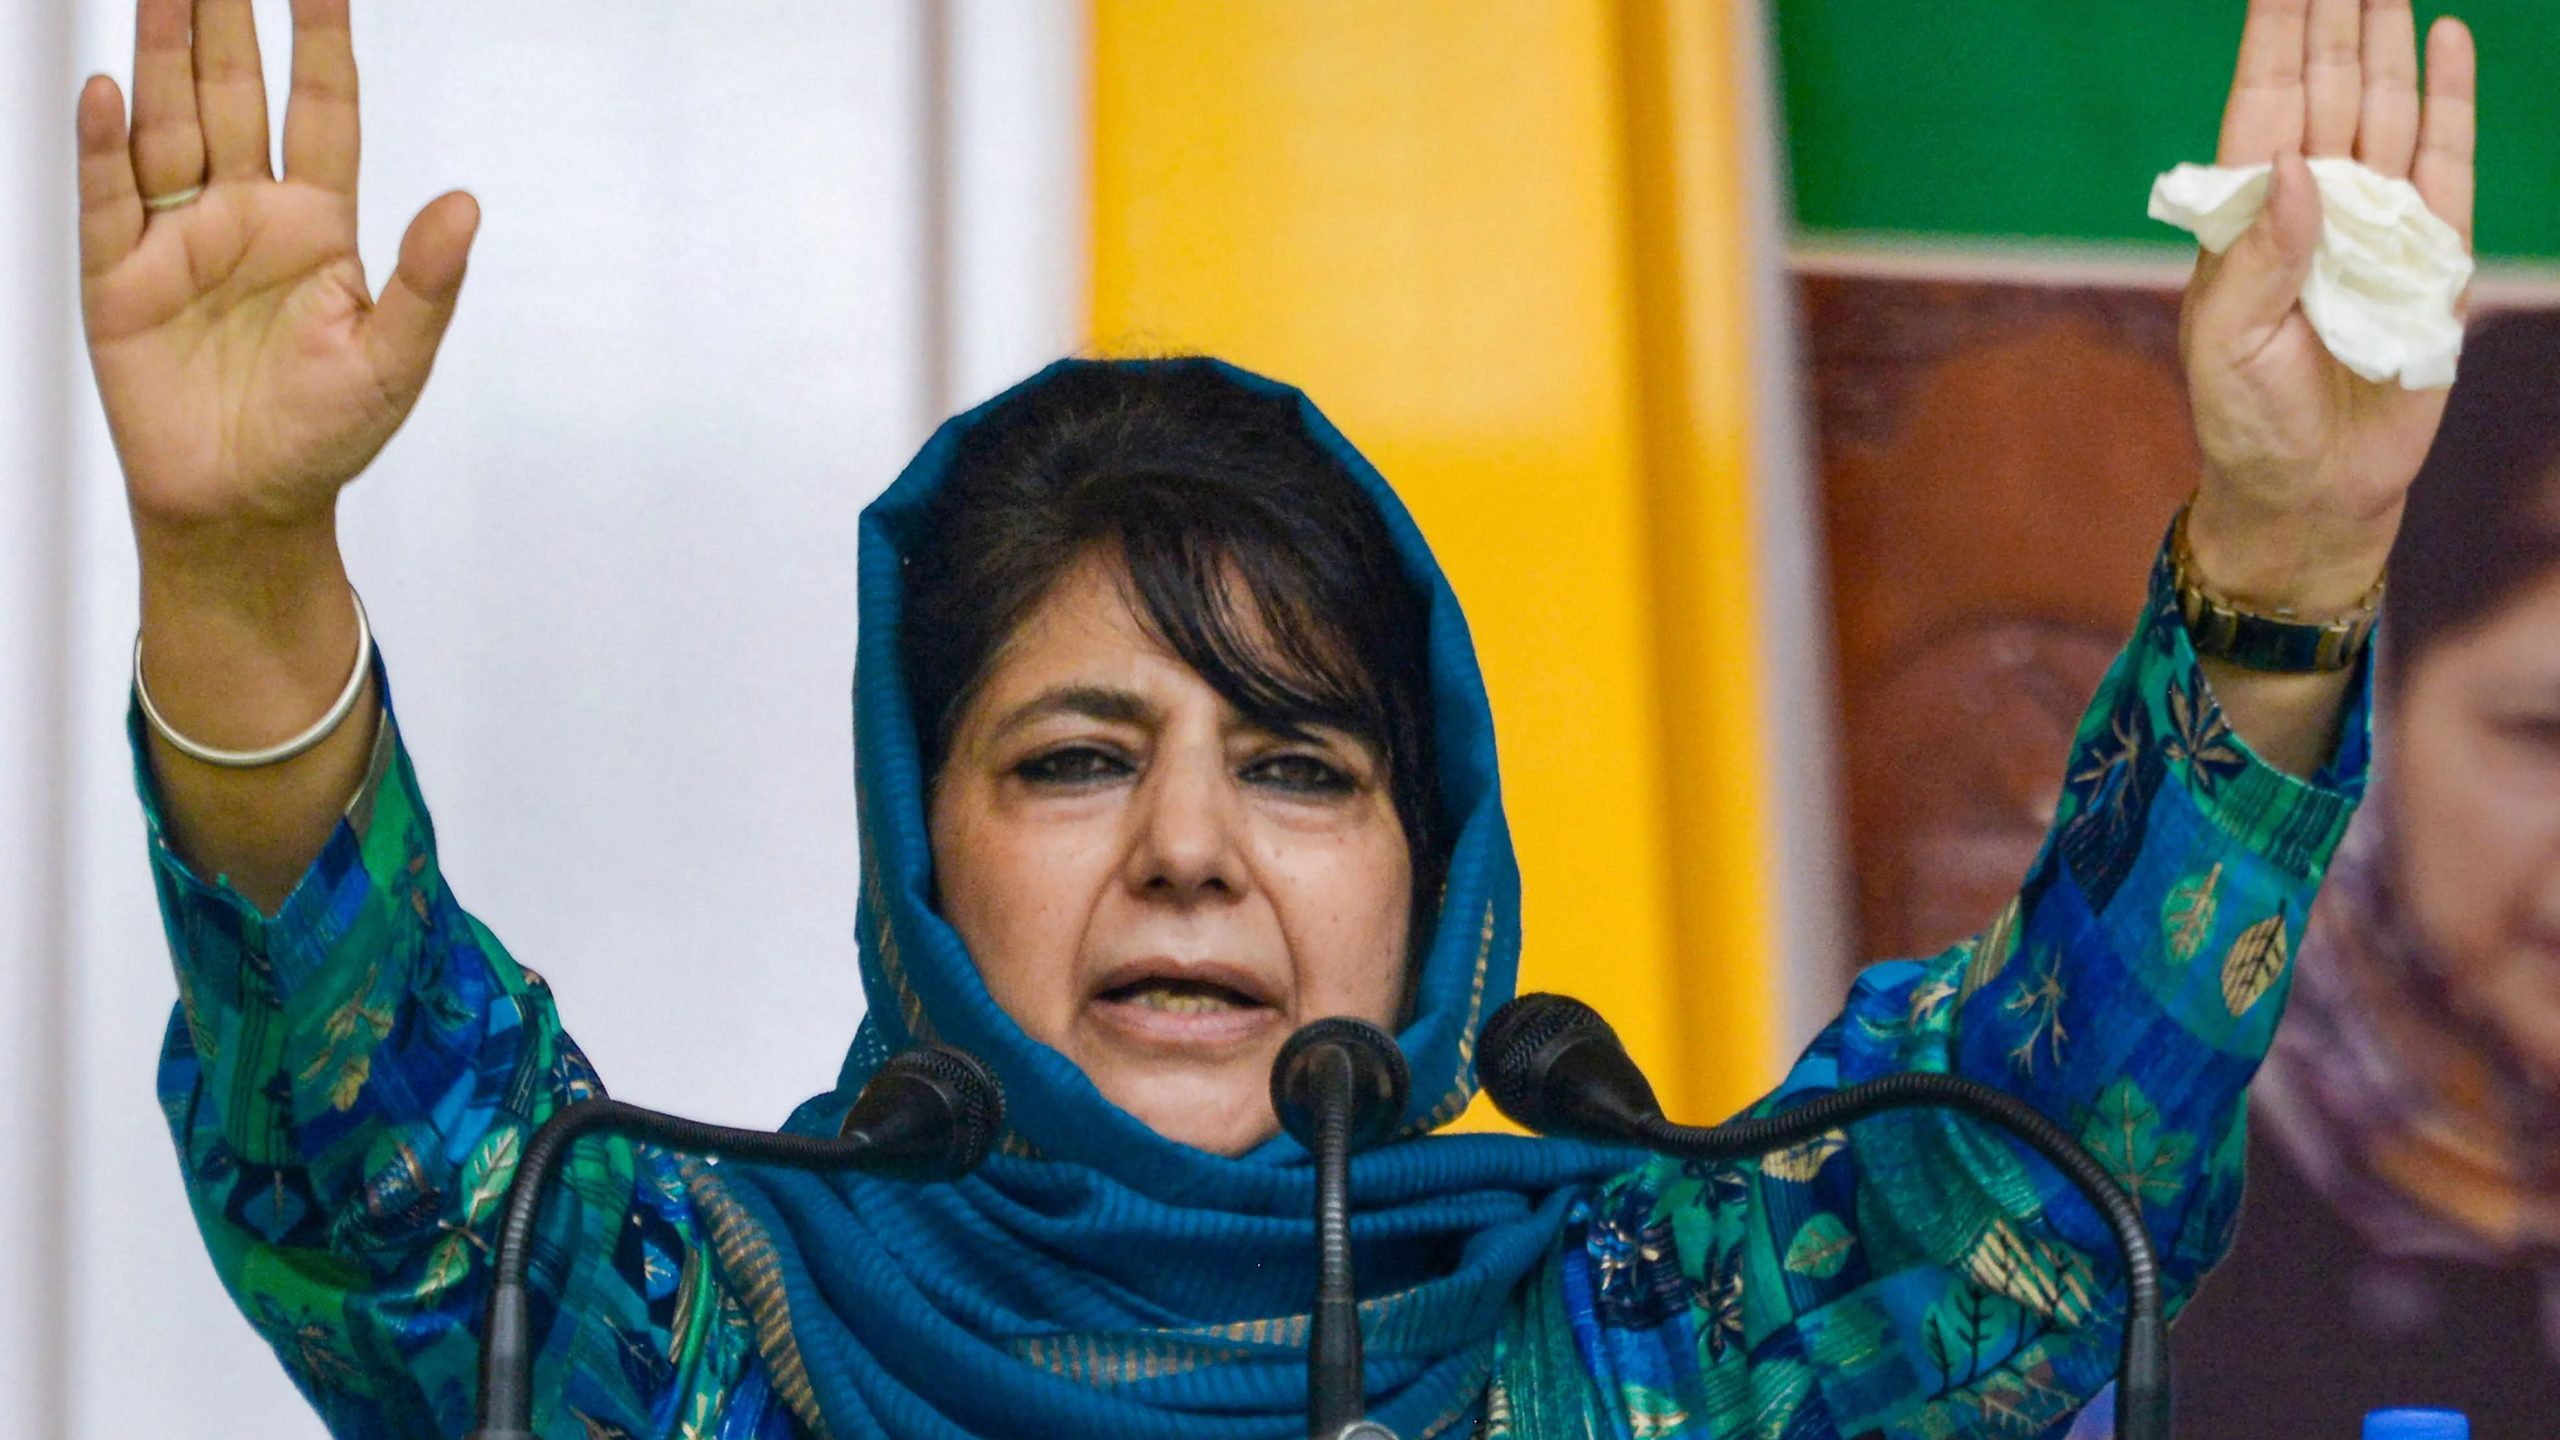 ‘Will take back what was snatched illegally’: Mehbooba Mufti after being released from detention